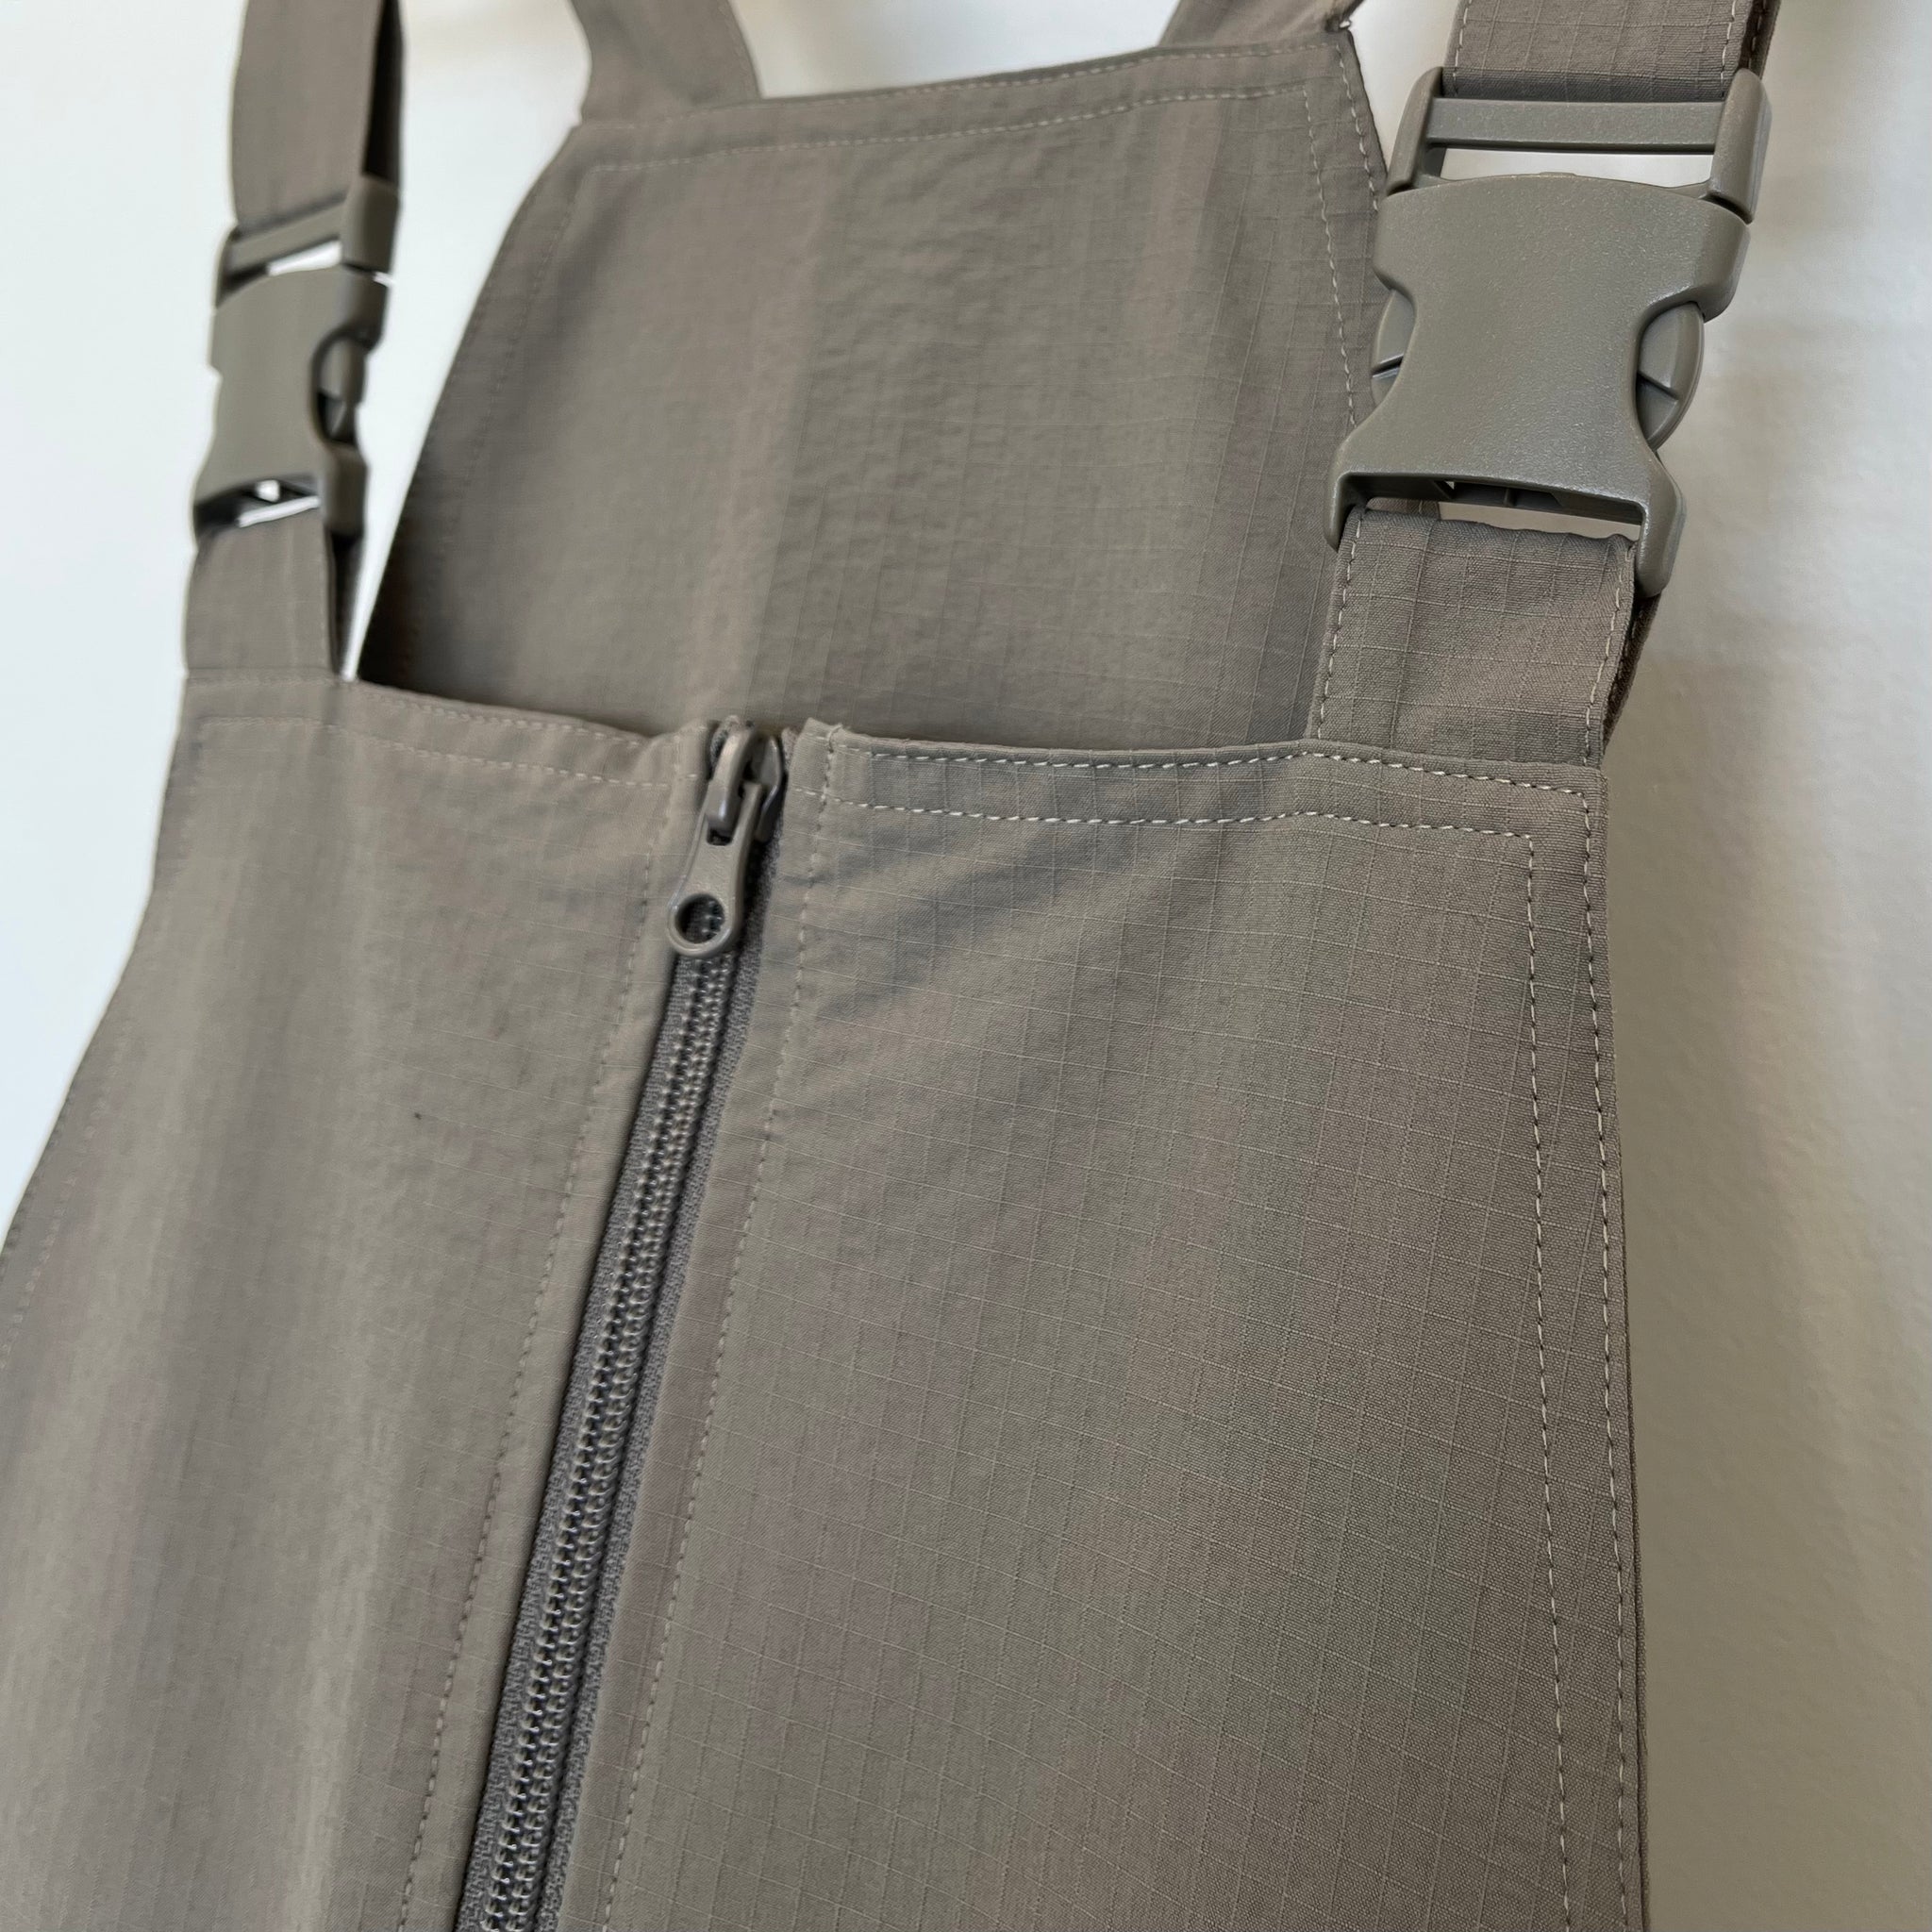 Hiking Overalls with Bungee Hem